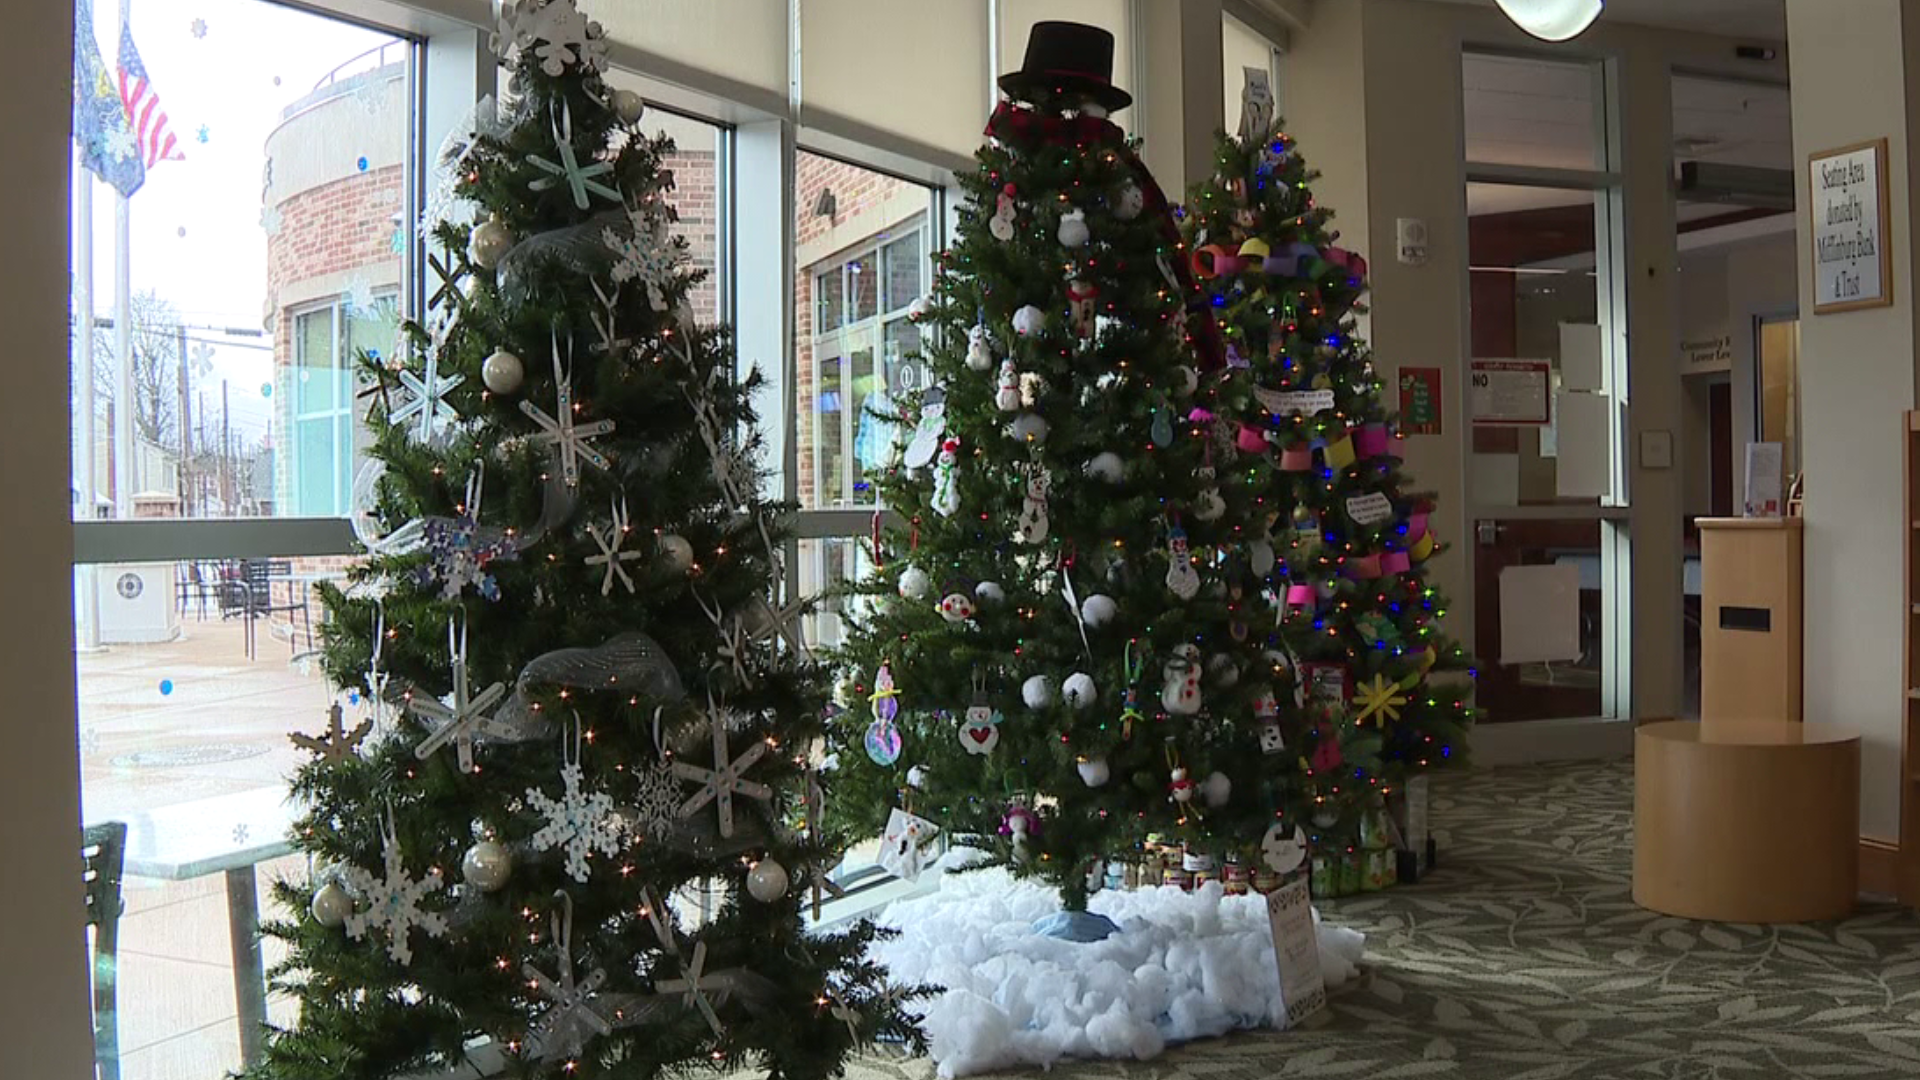 A library in Snyder County is filled with Christmas trees and wreaths for its annual Festival of Trees, and you can participate online.